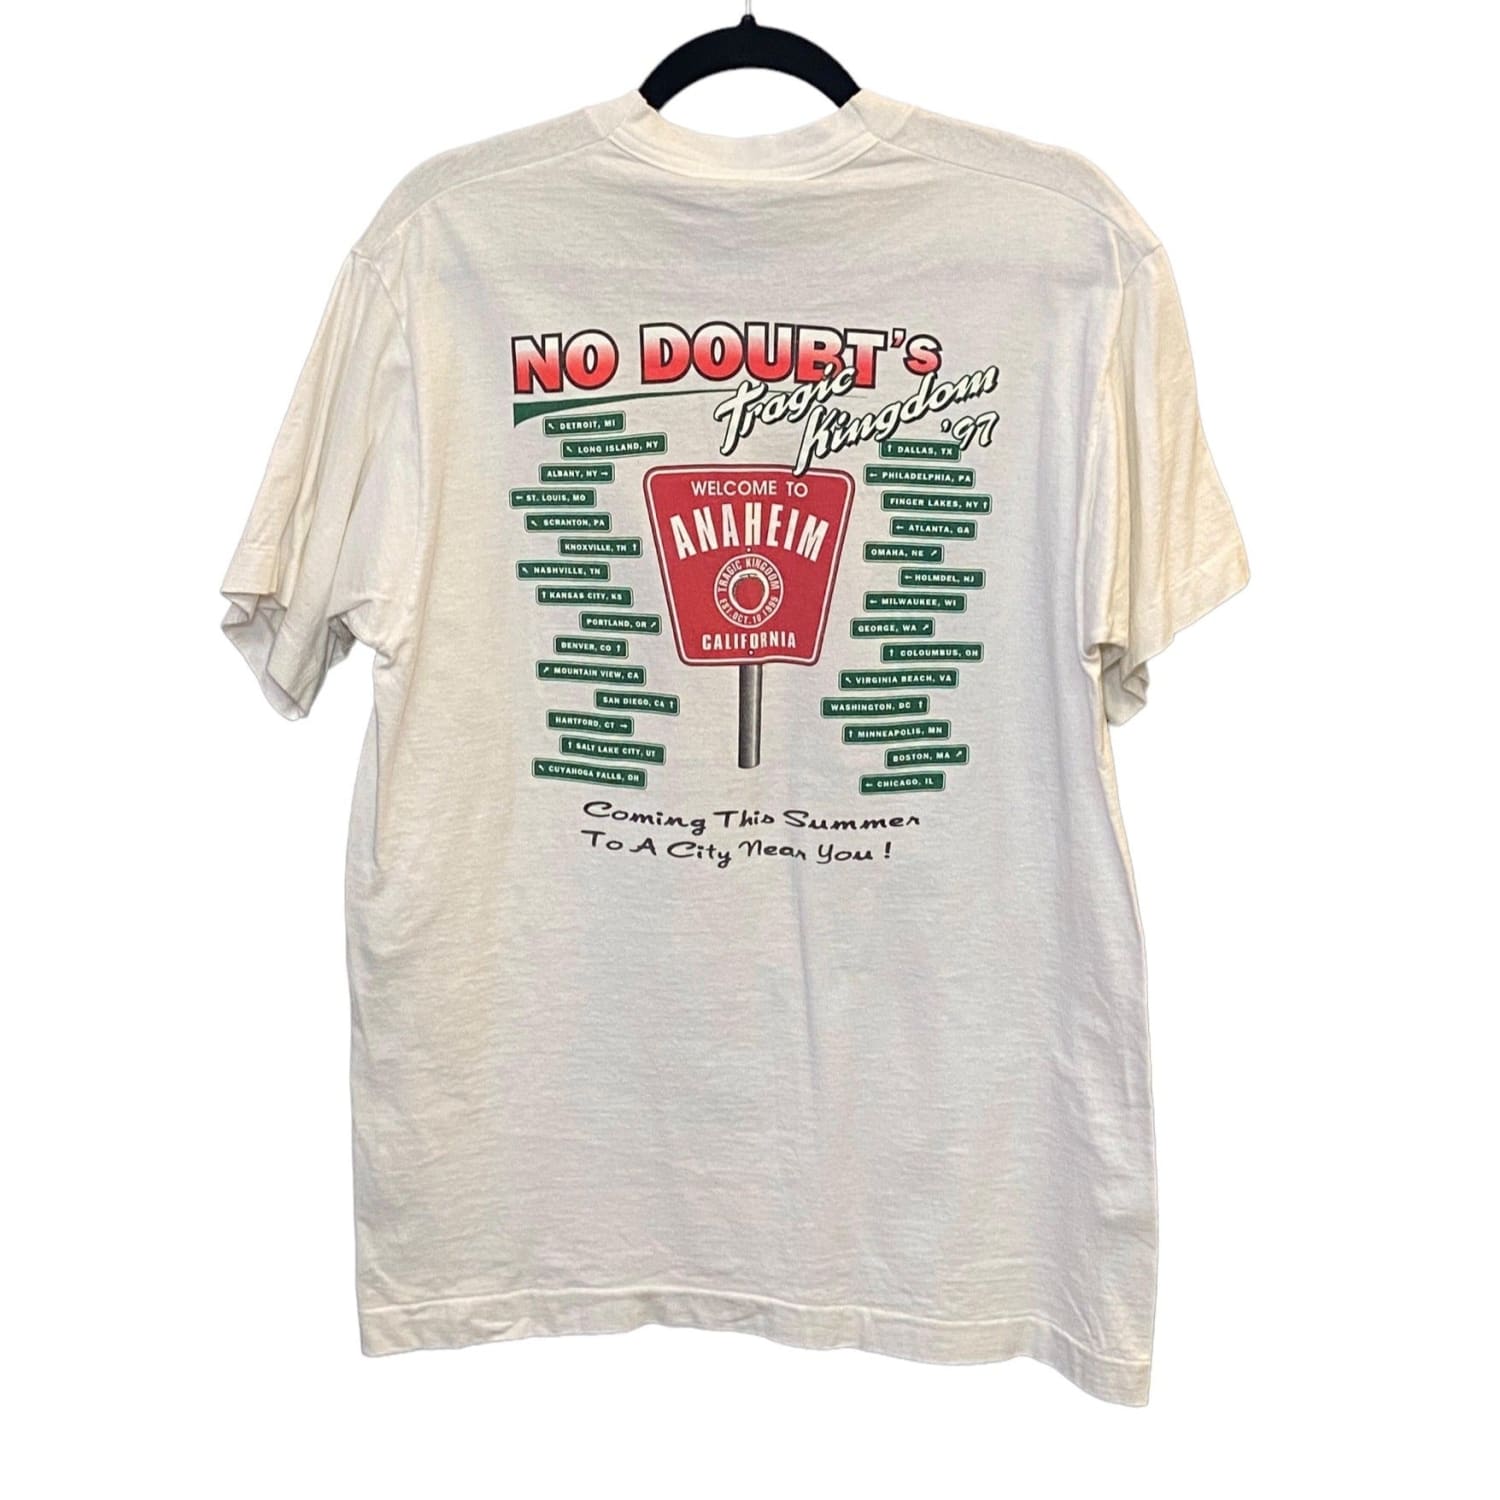 No Doubt 1999 Tee 90s Baby - Style - Vintage - Music Tour -